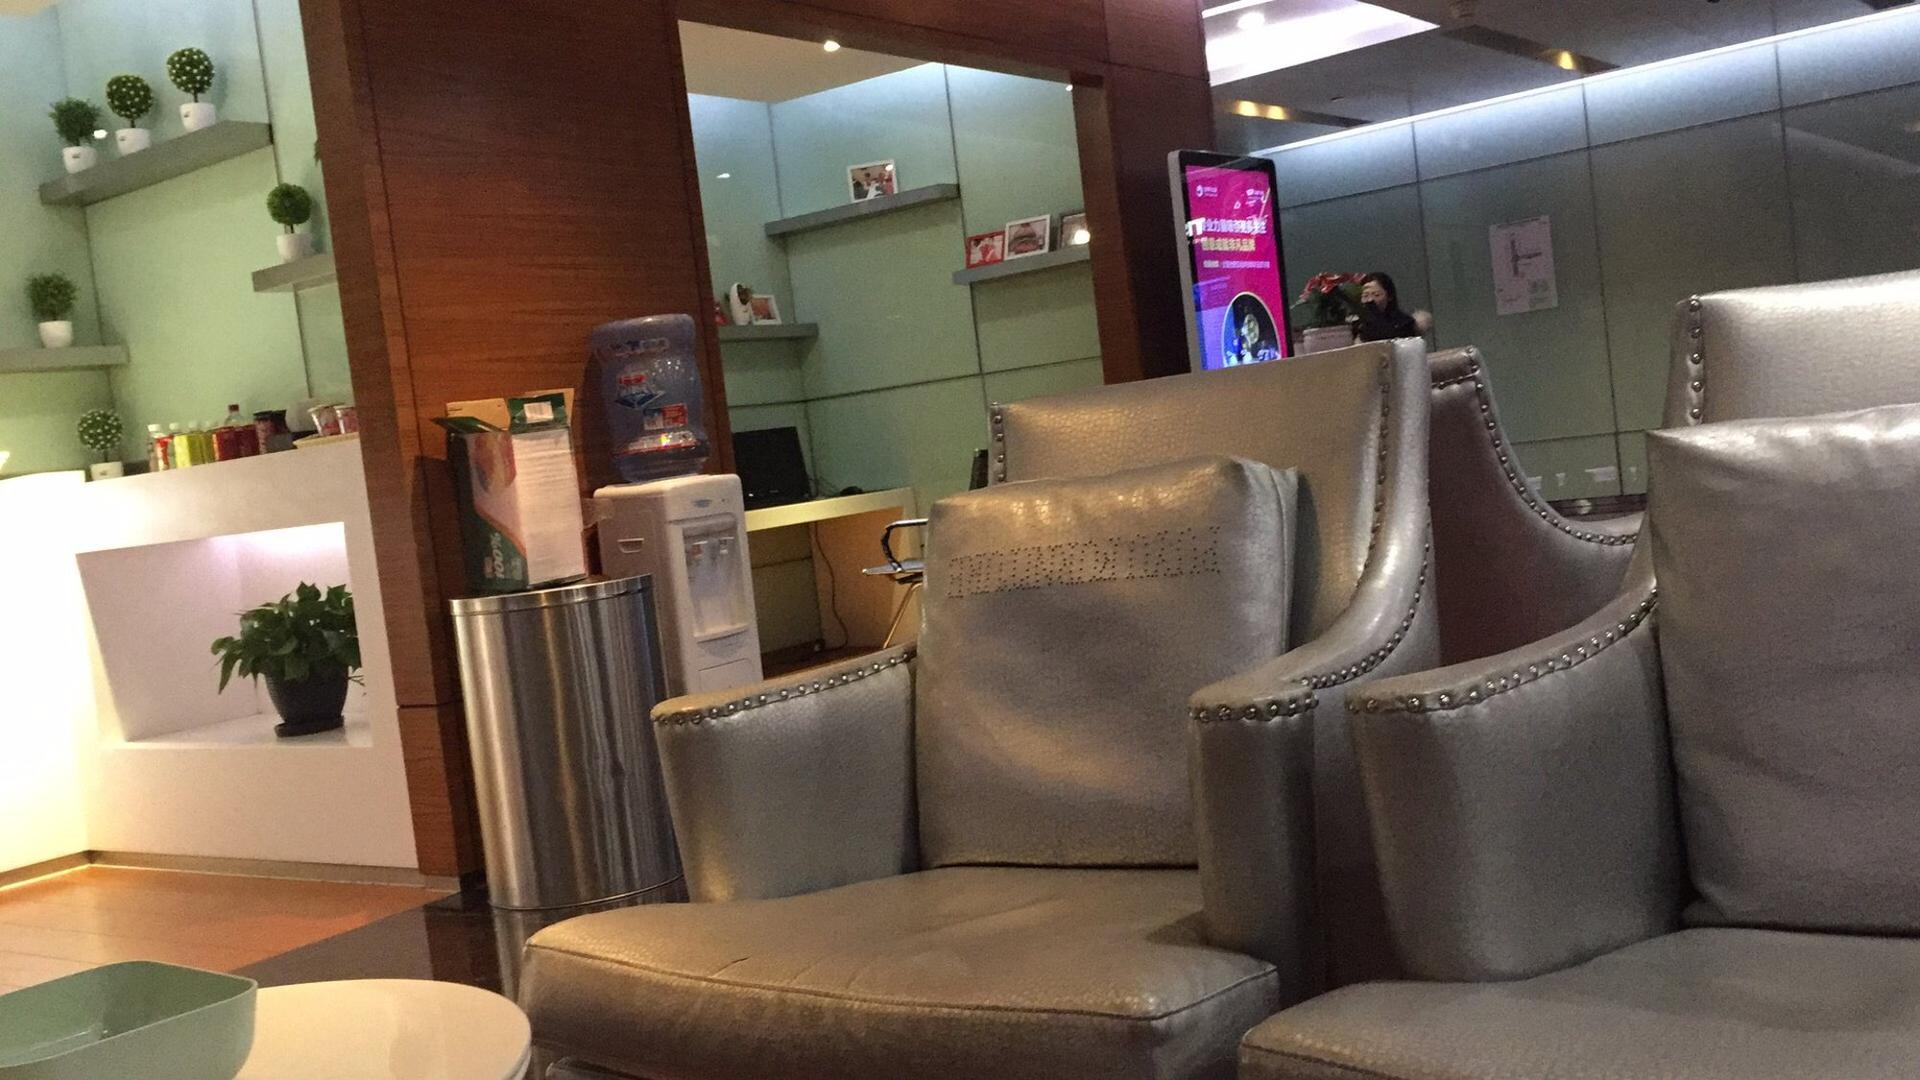 Chengdu Airport First Class Lounge (Gate 172) image 2 of 2